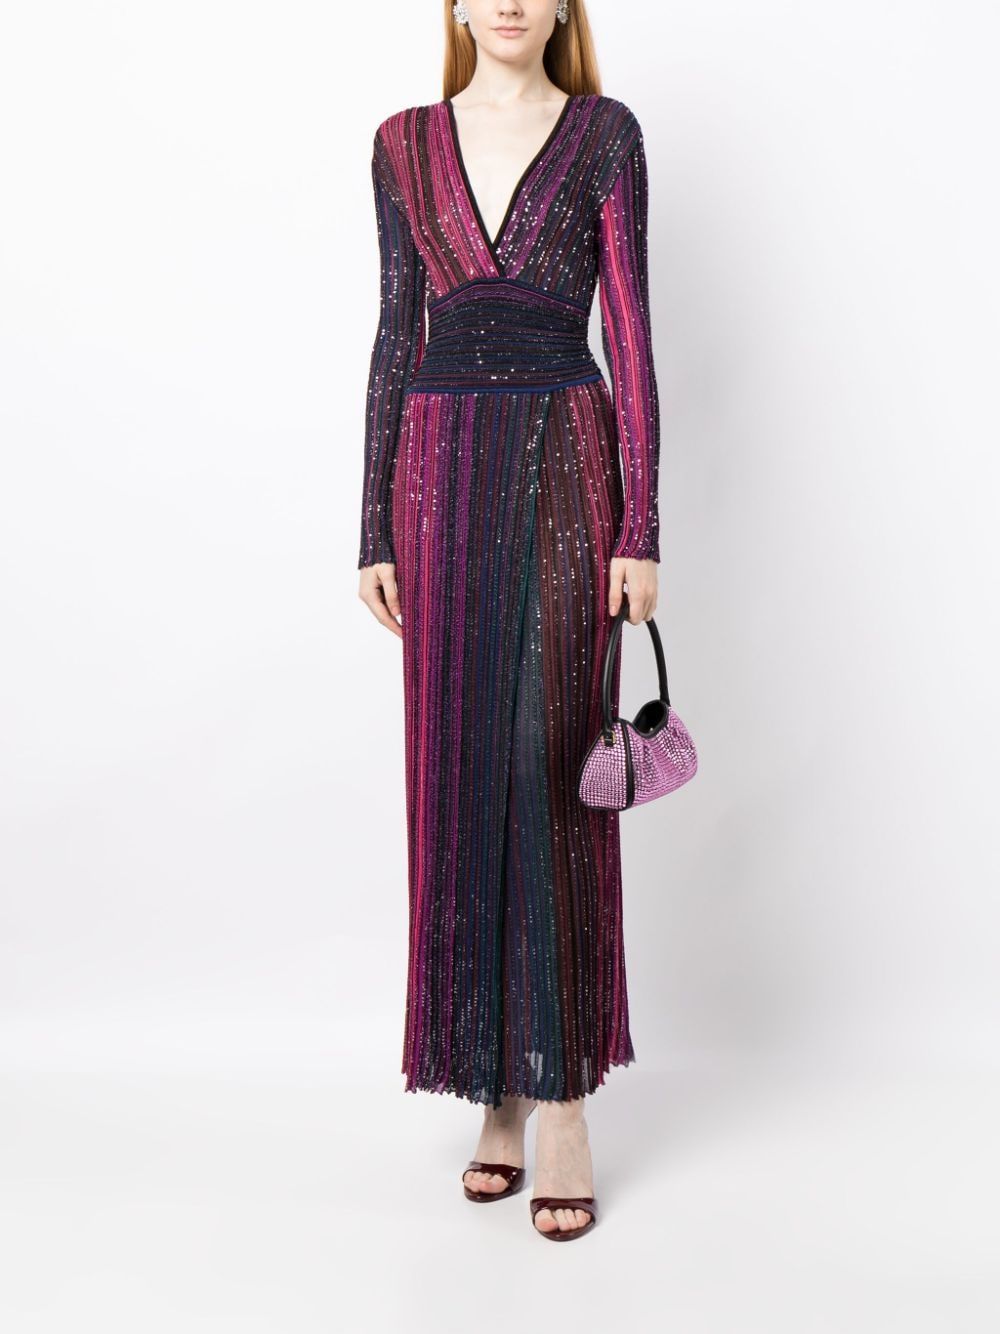 MISSONI Striped Sequin Maxi Dress with Plunging V-Neck